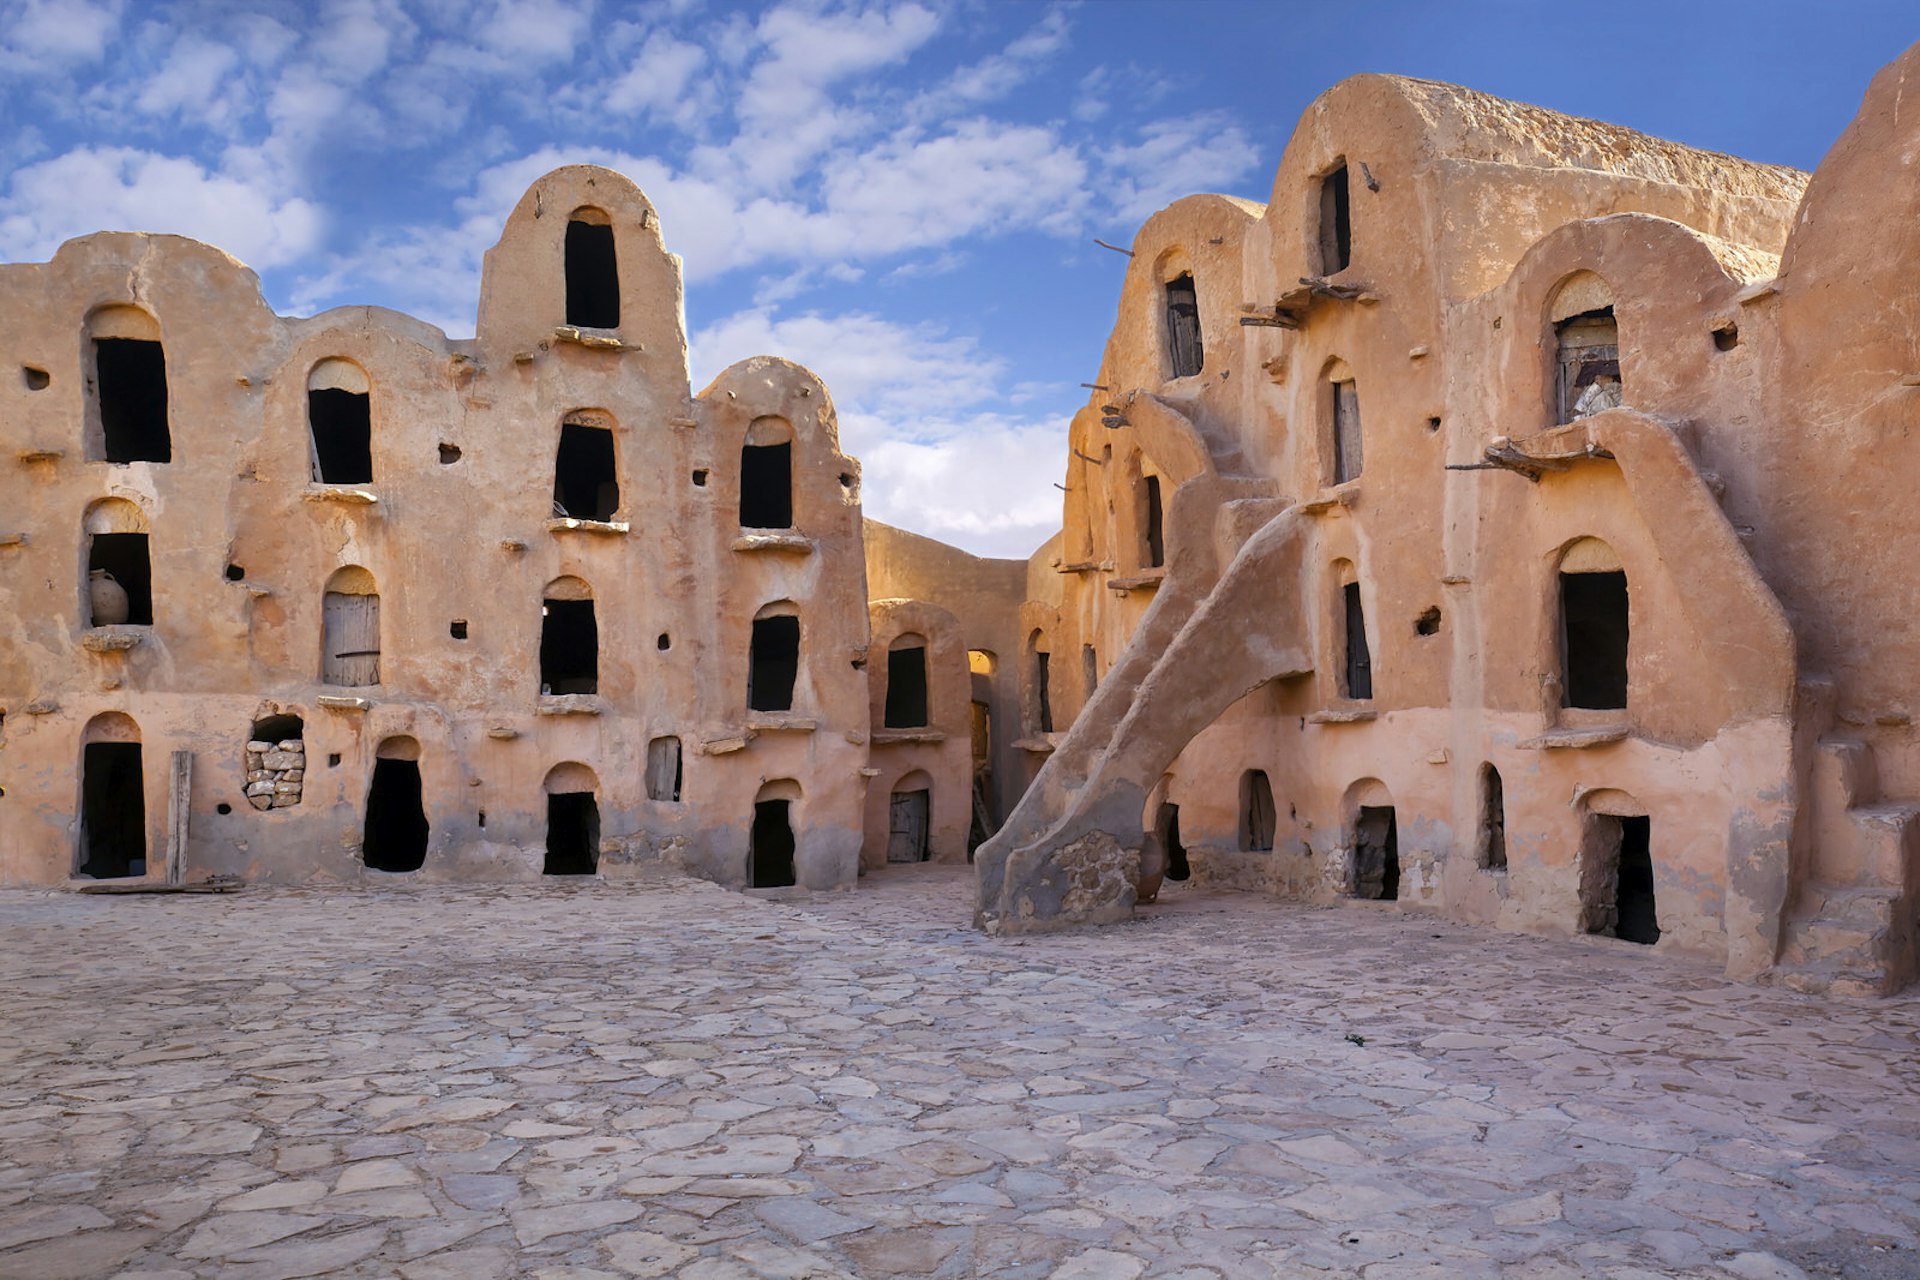 The courtyard of Ksar Ouled Soltane, a fortified granary, or ksar, located in the Tataouine district in southern Tunisia